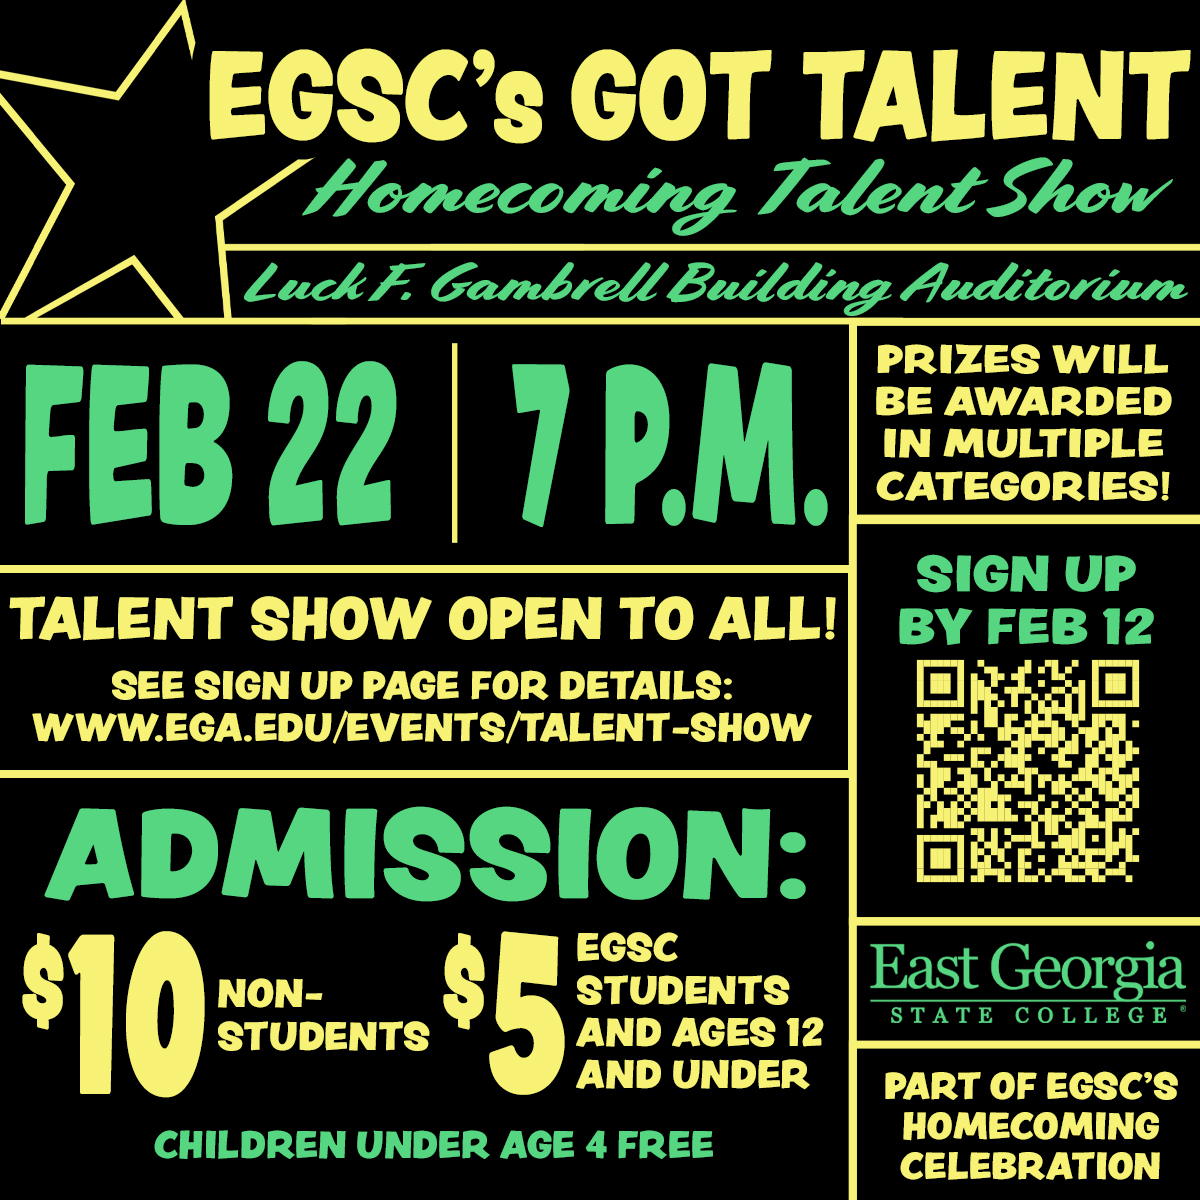 EGSC Homecoming Talent Show